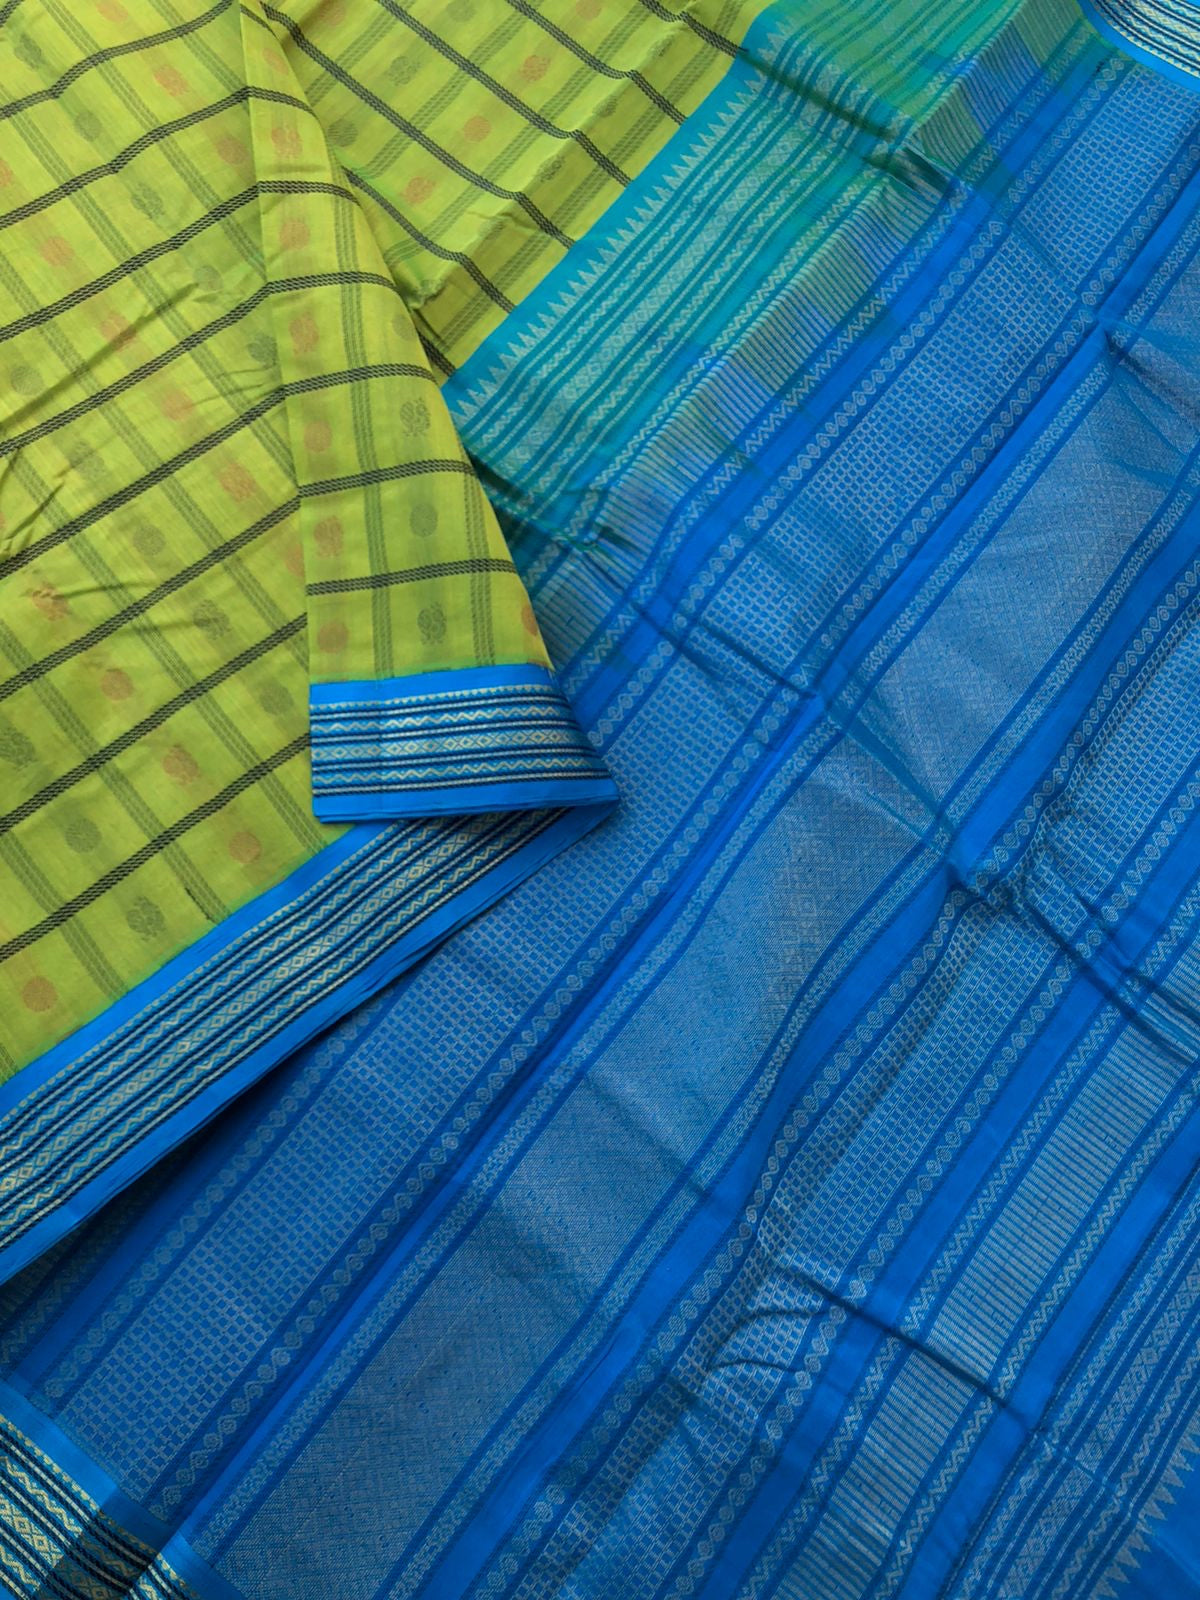 Divyam - Korvai Silk Cotton with Pure Silk Woven Borders - apple green and blue 1000 buttas